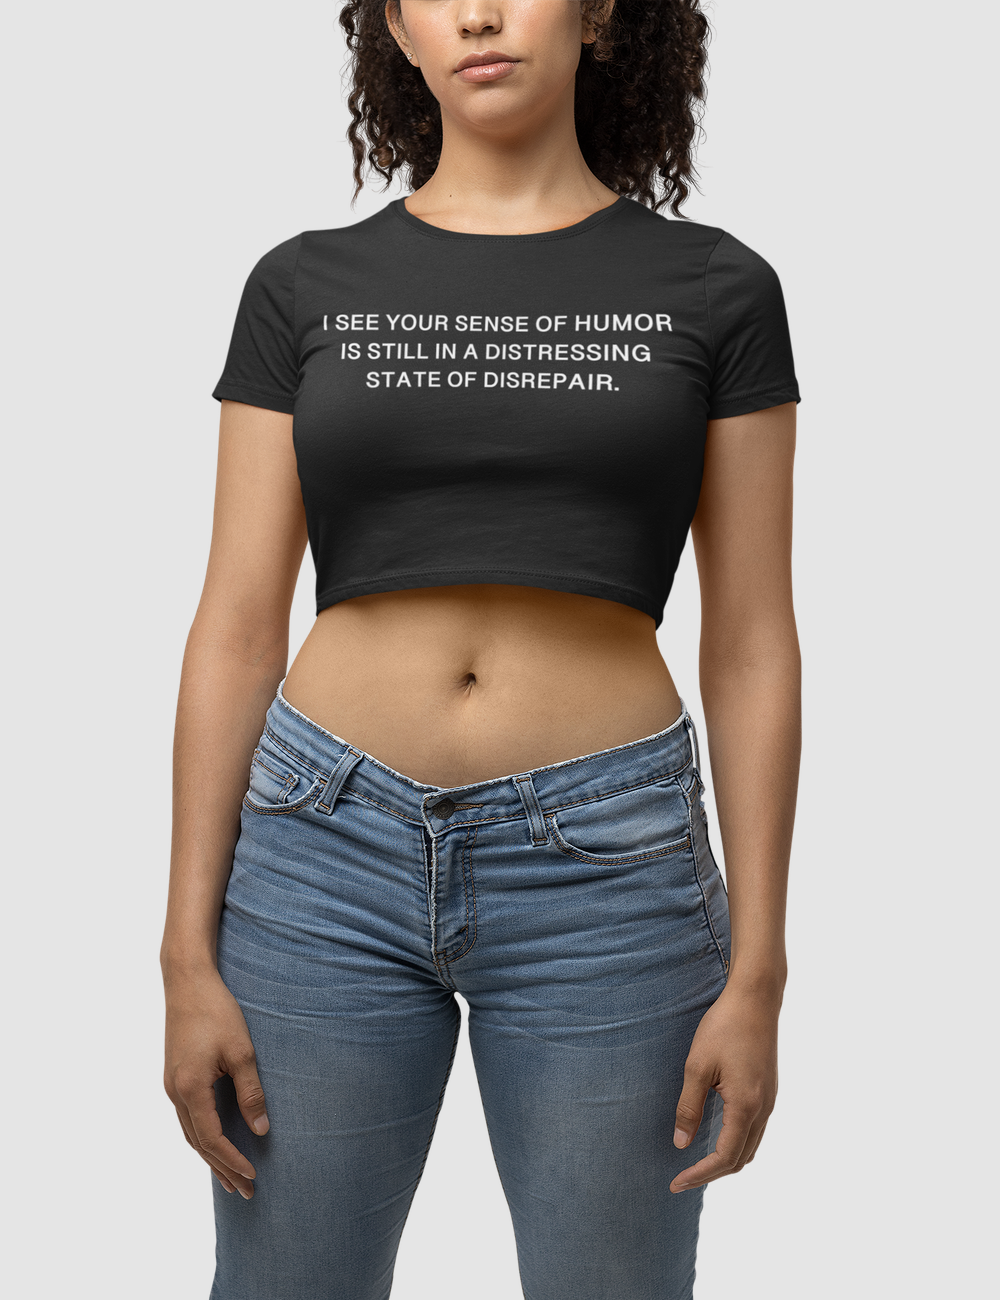 The Distressing State Of Your Sense Of Humor Women's Fitted Crop Top T-Shirt OniTakai